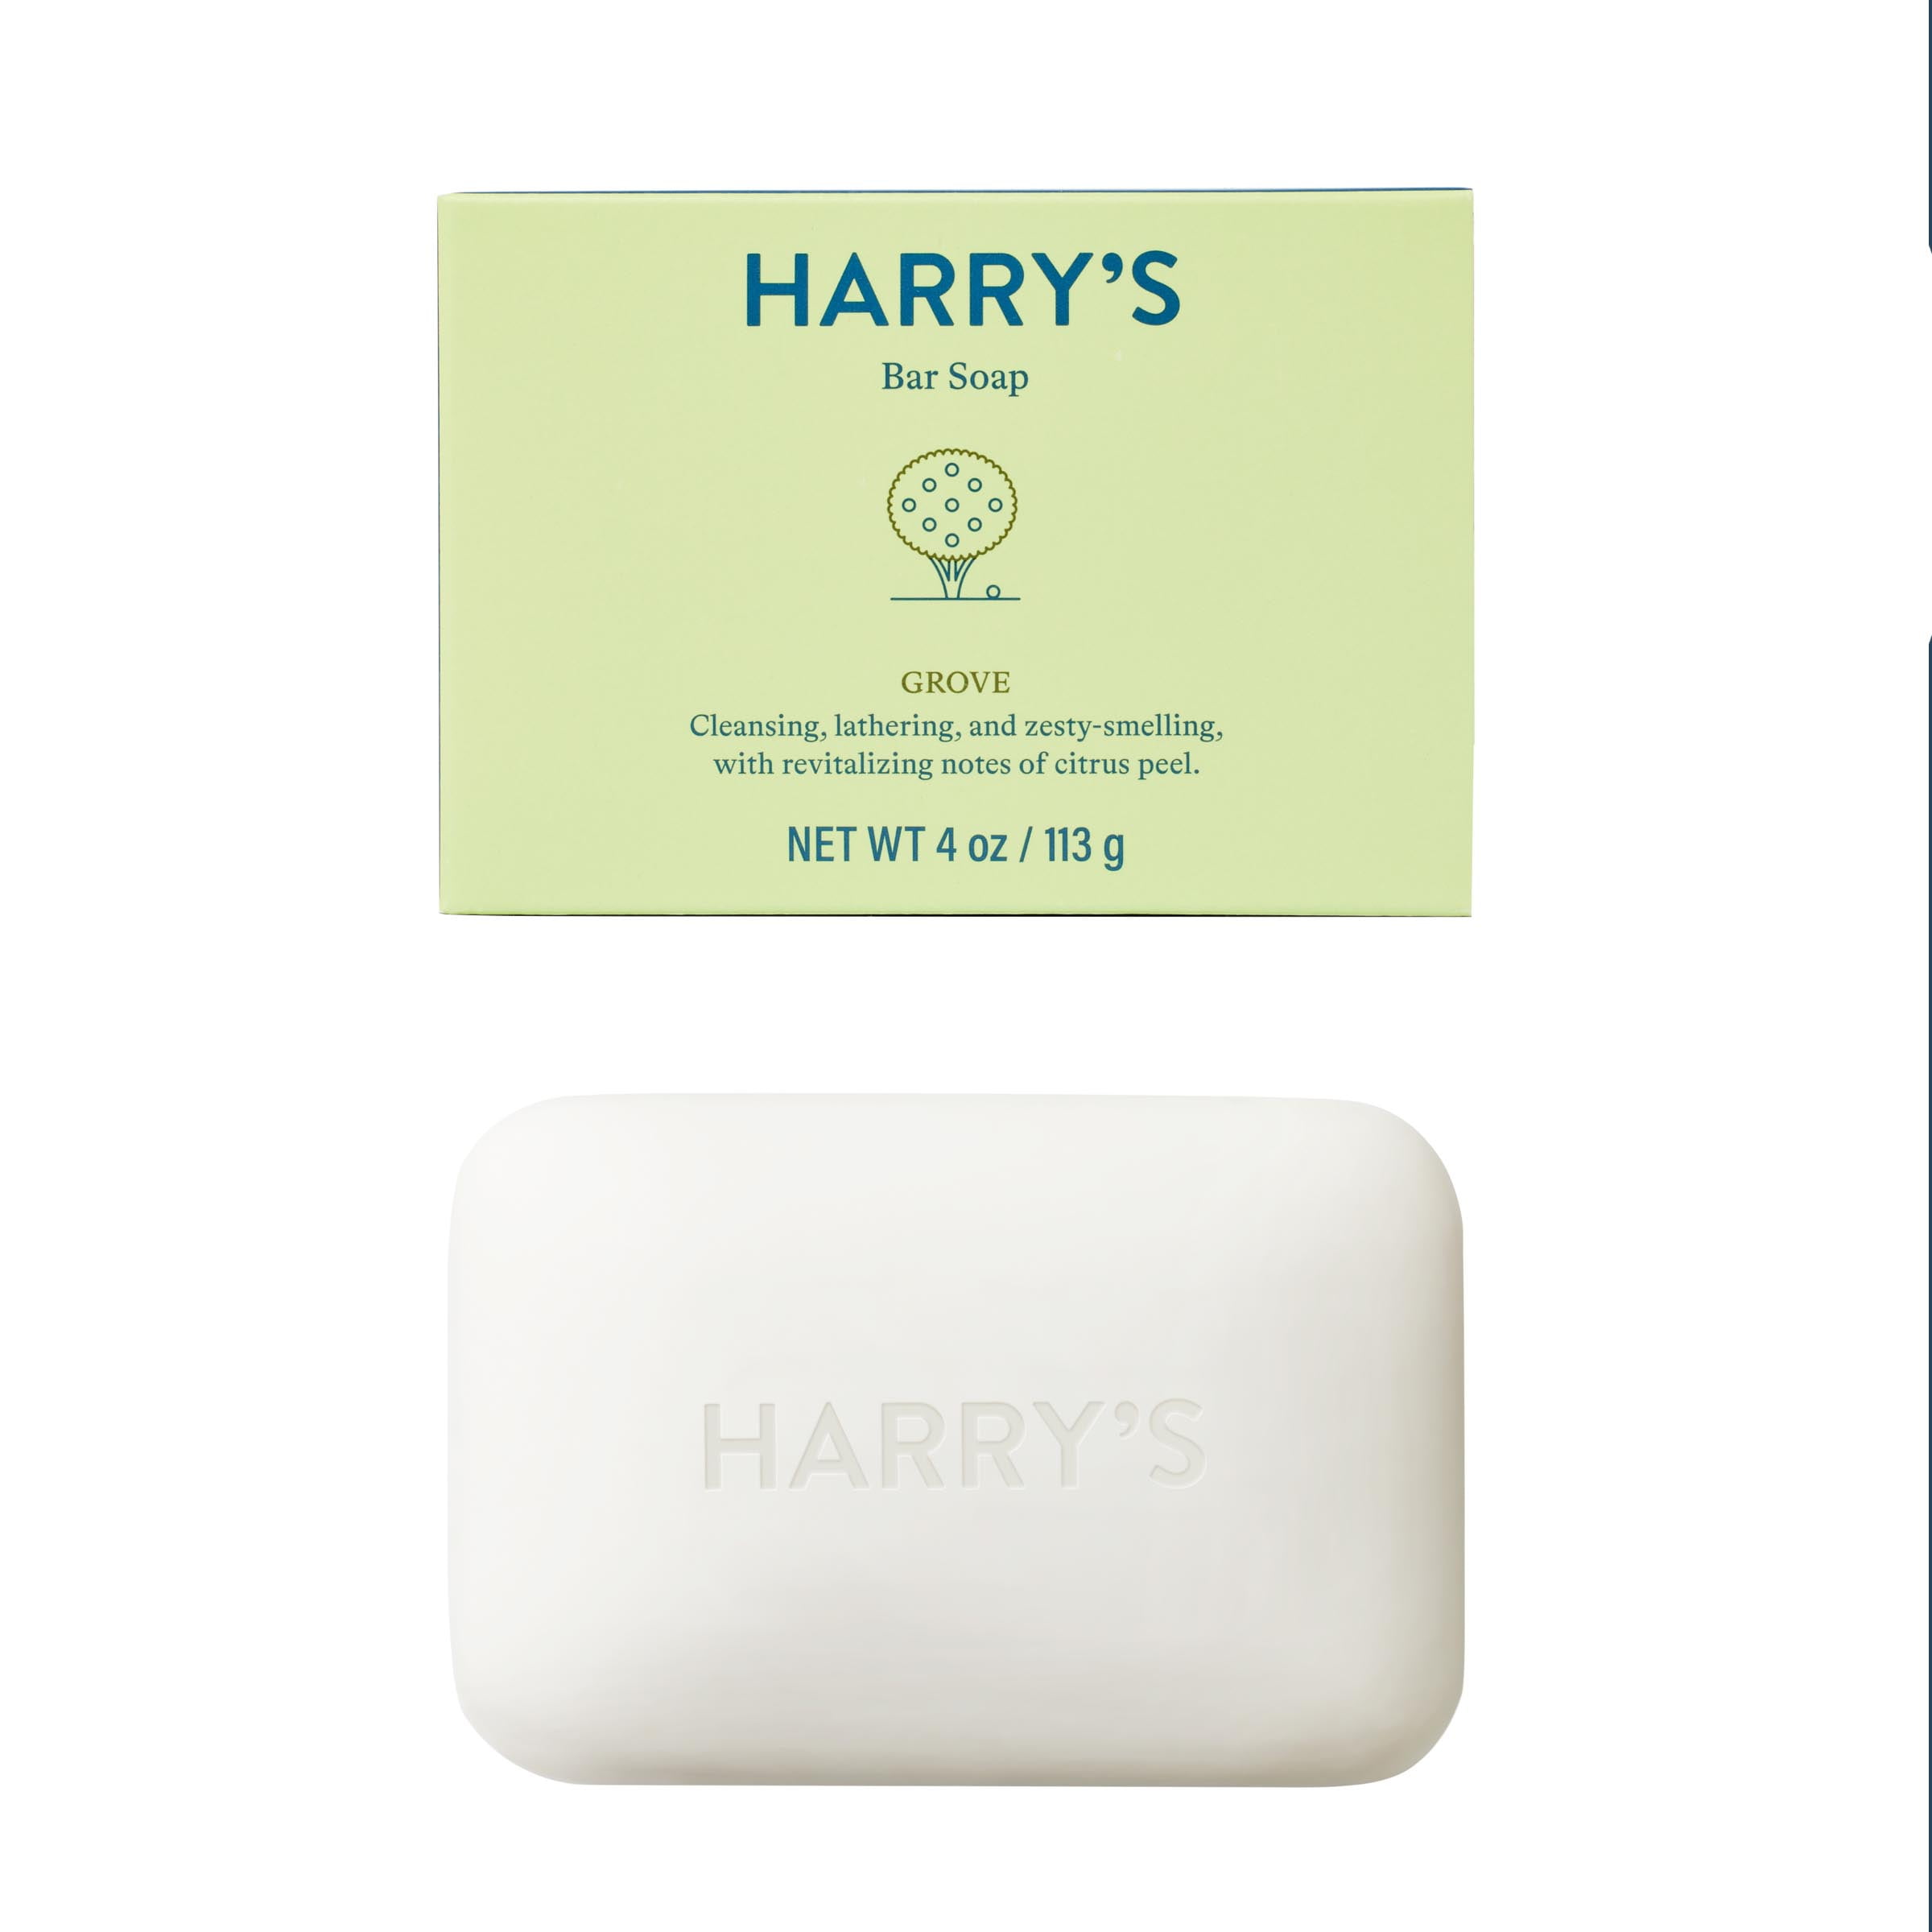 Harry's Bar Soap for Sale in Oswego, IL - OfferUp